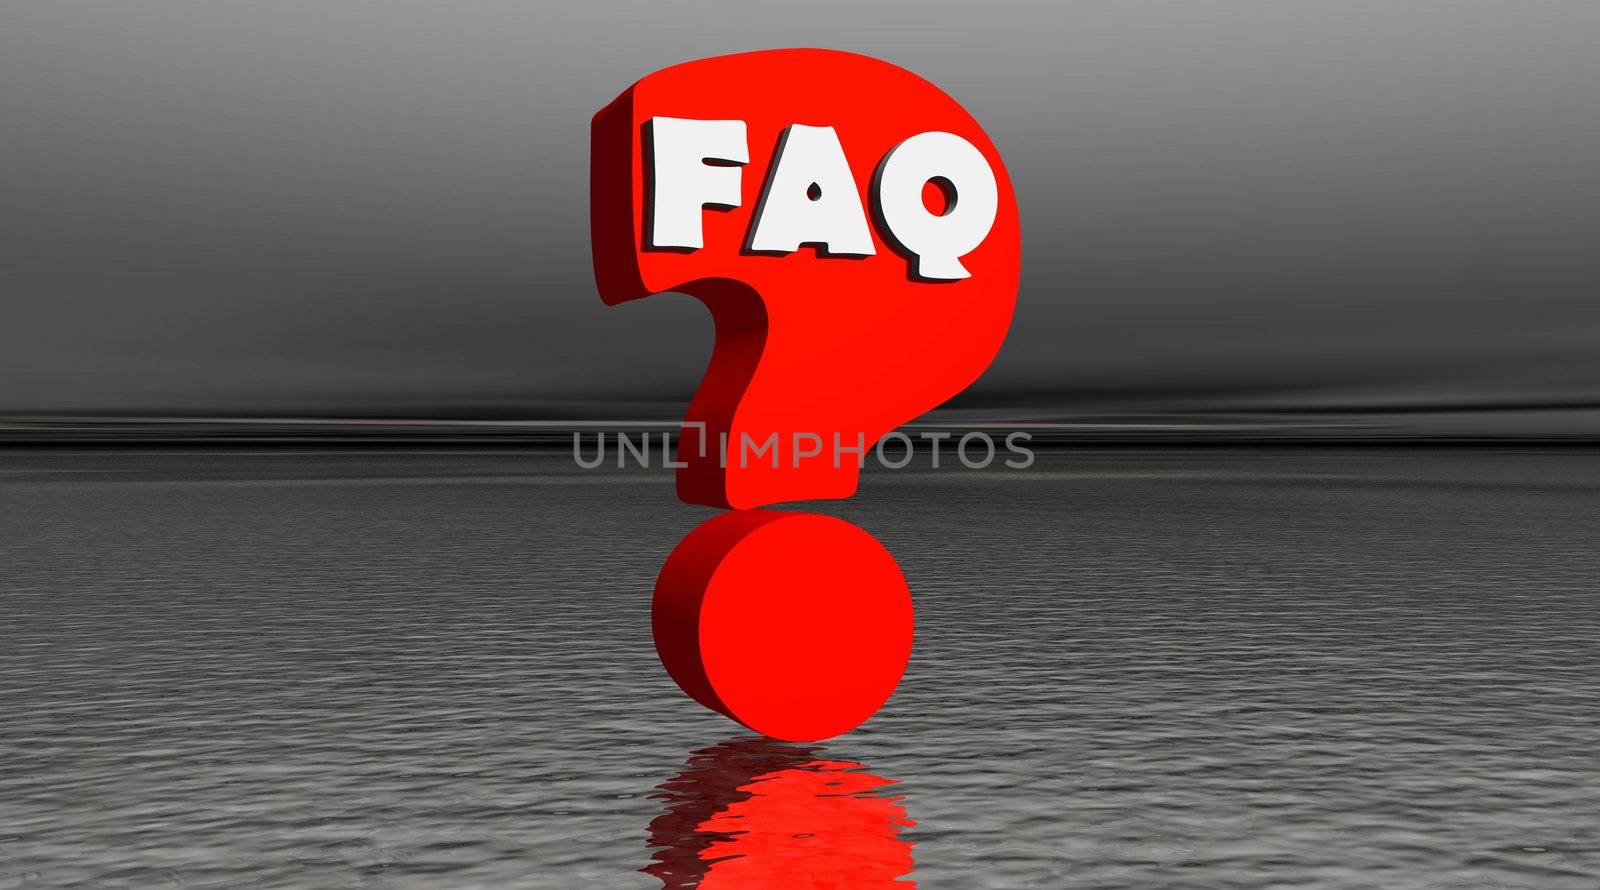 Red question mark with FAQ written inside and grey background with little reflection of the question mark in the ocean